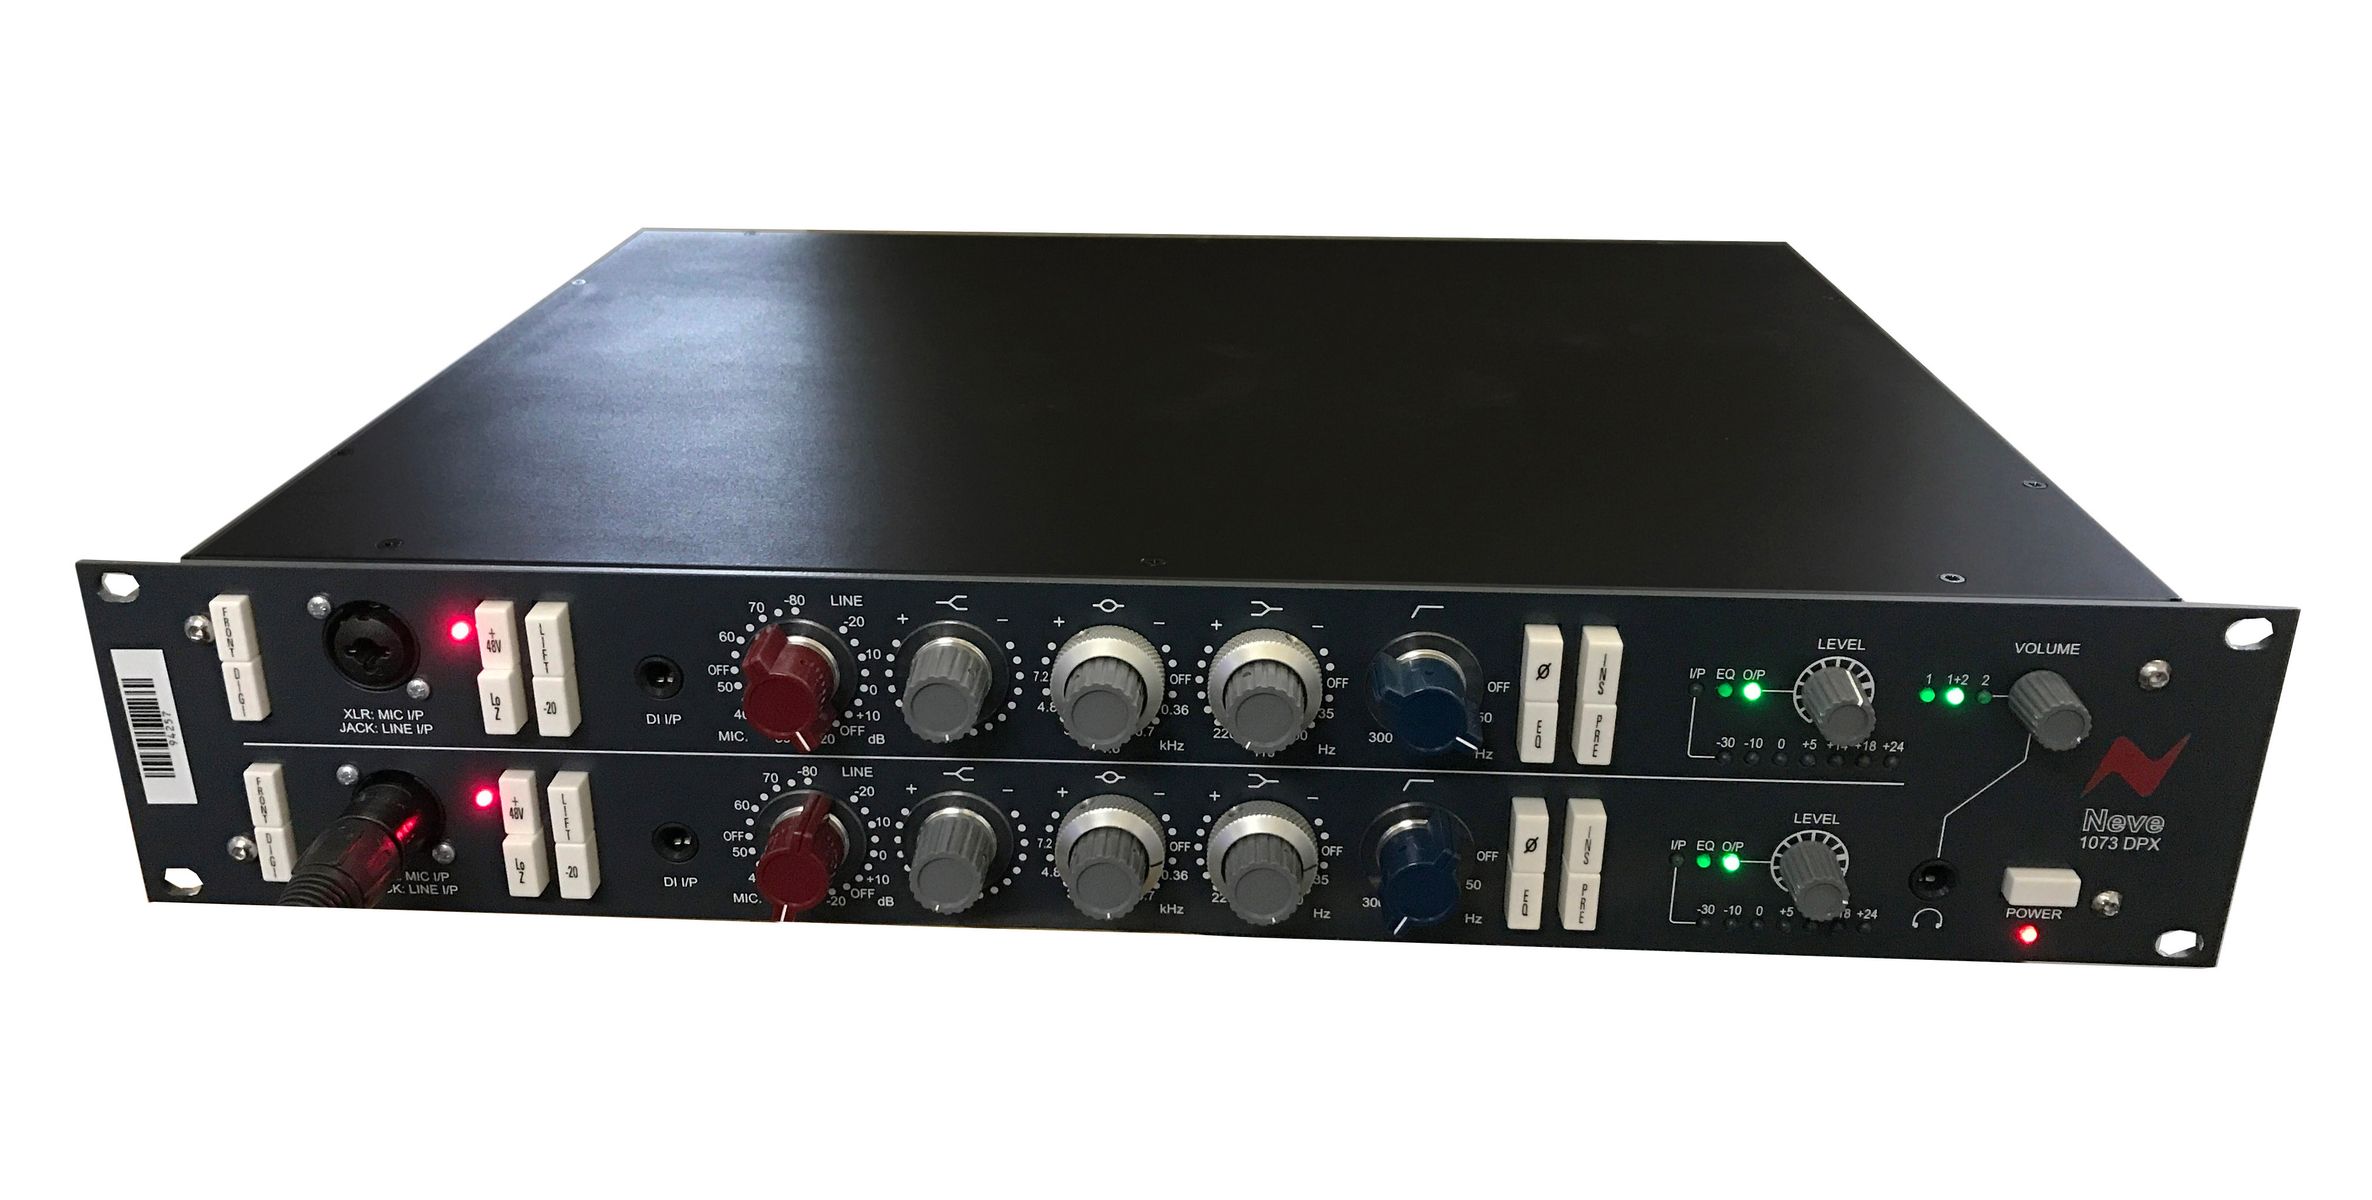 The Neve 1073 DPX Dual Mic Preamp is available at Hollywood Sound Systems.